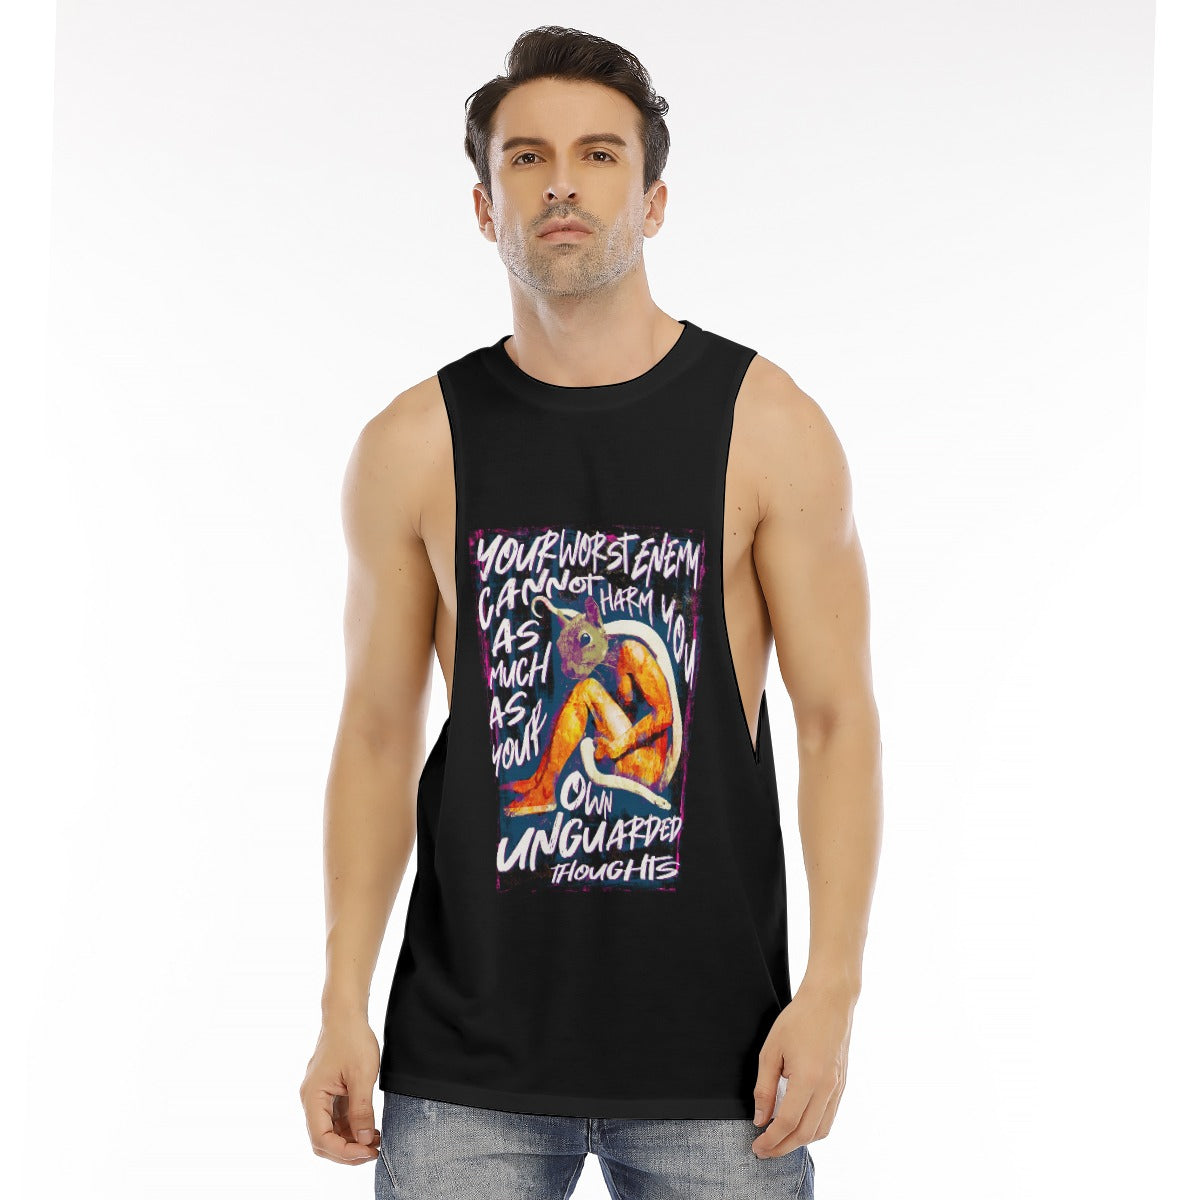 "Unguarded Thoughts" Tank Top